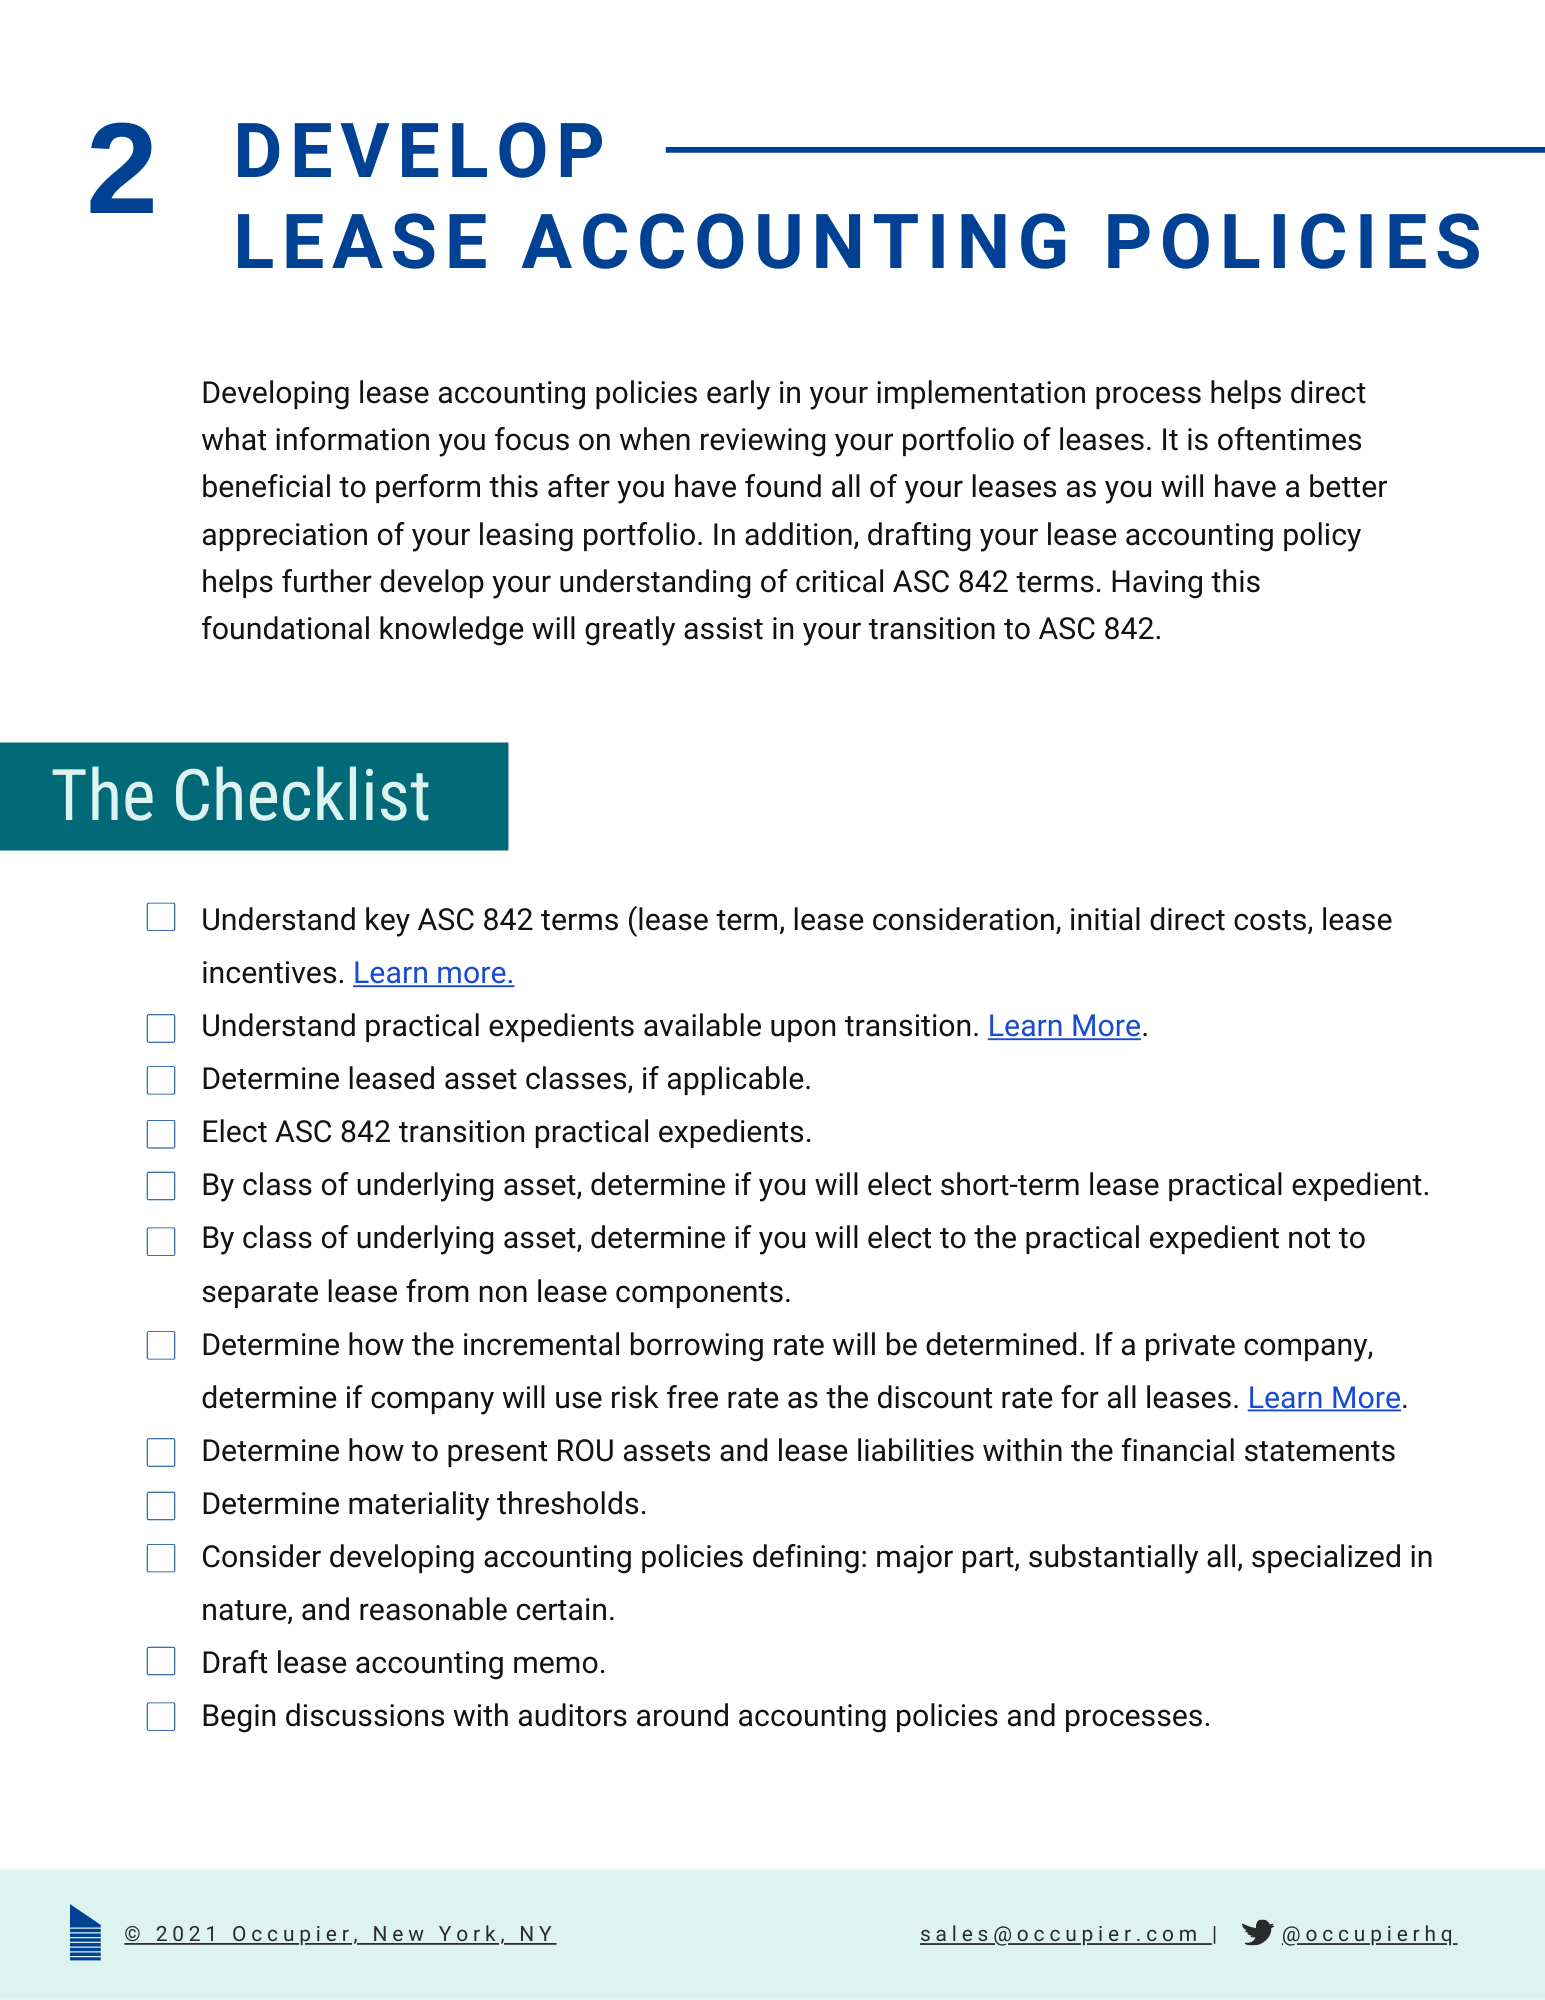 develop lease accounting policies